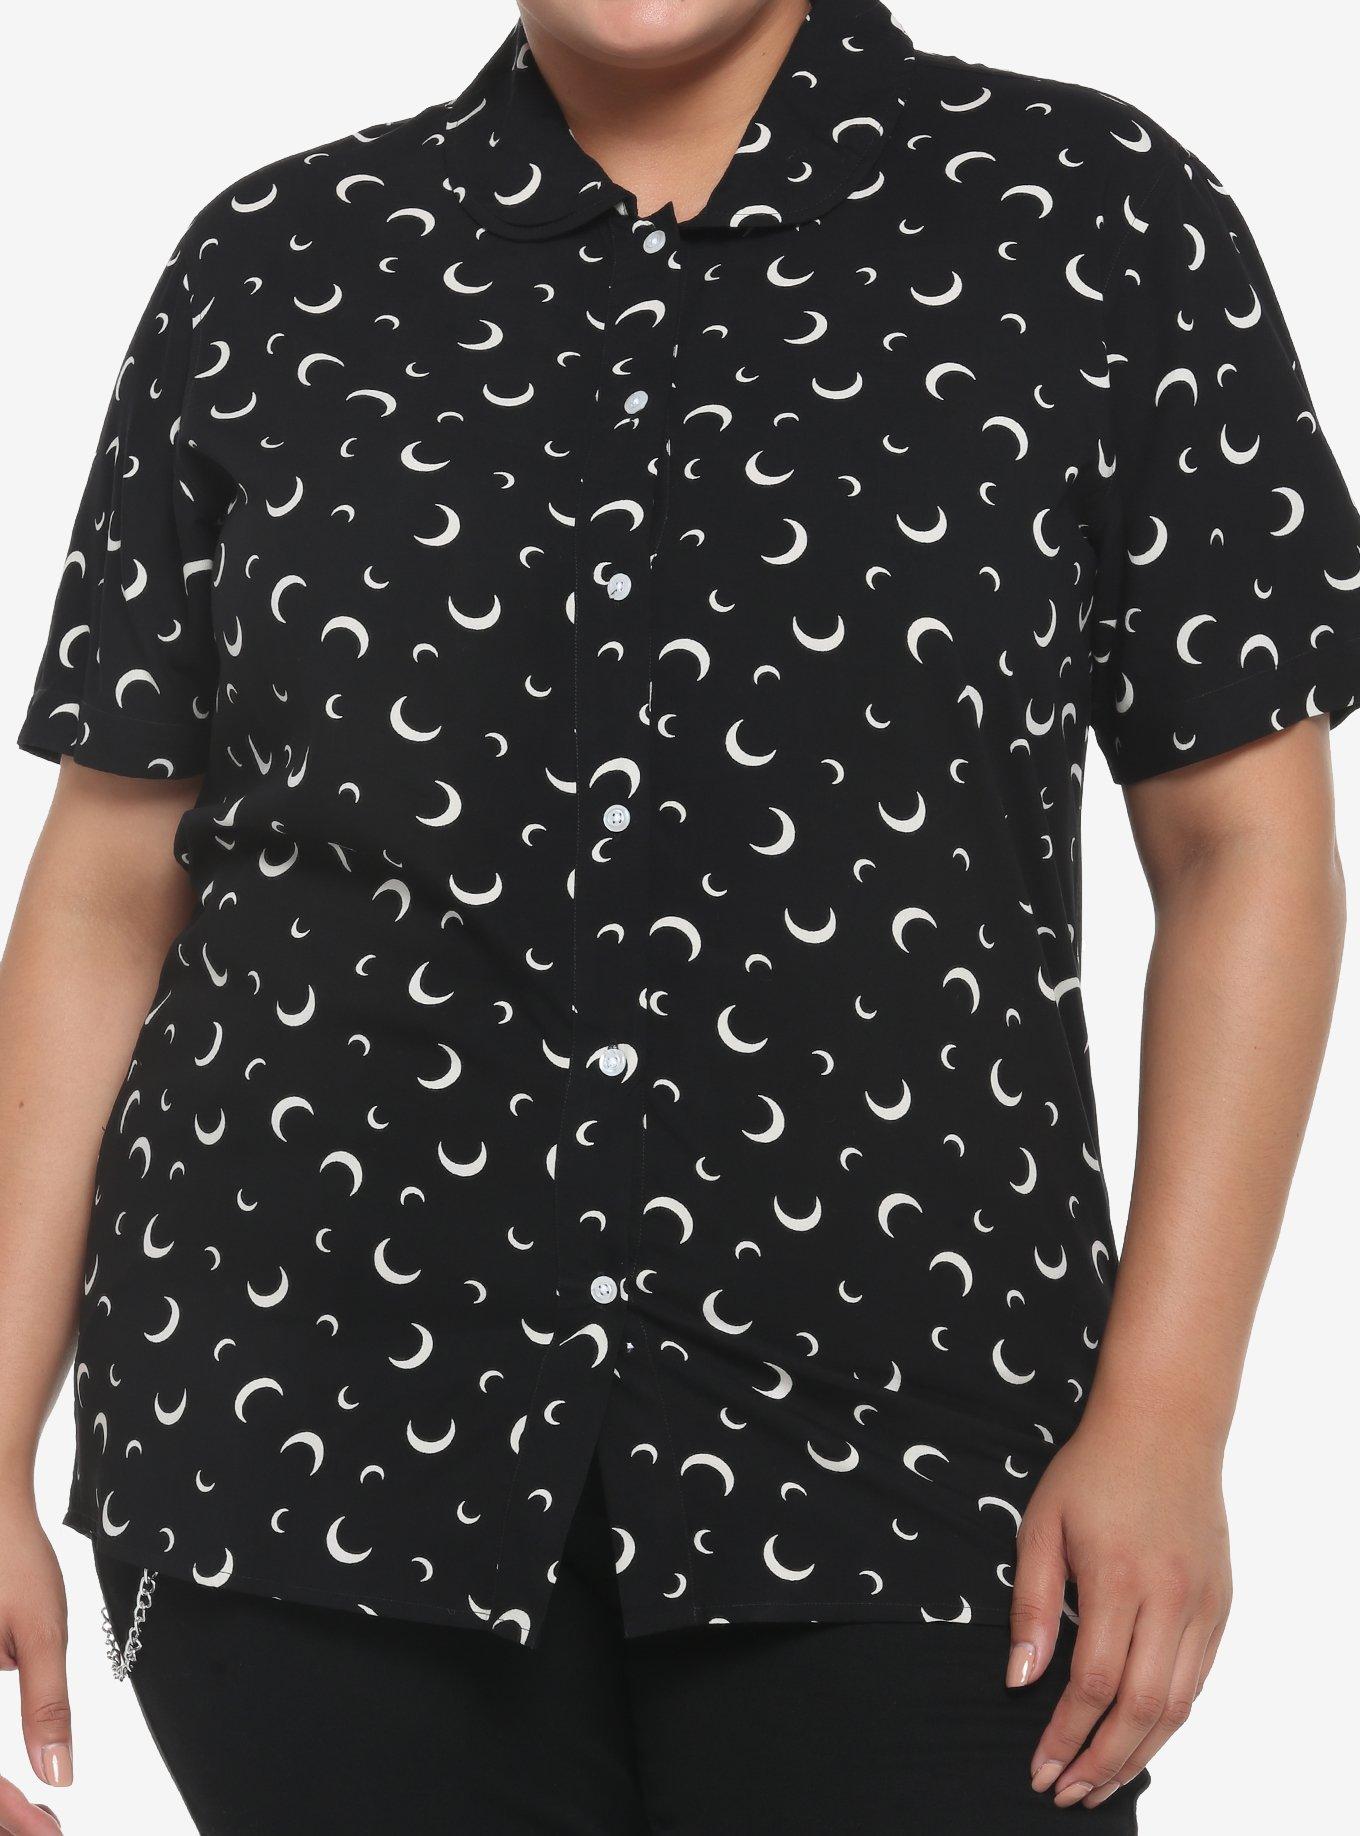 Crescent Moon Girls Resort Woven Button-Up Plus Size, BLACK, hi-res